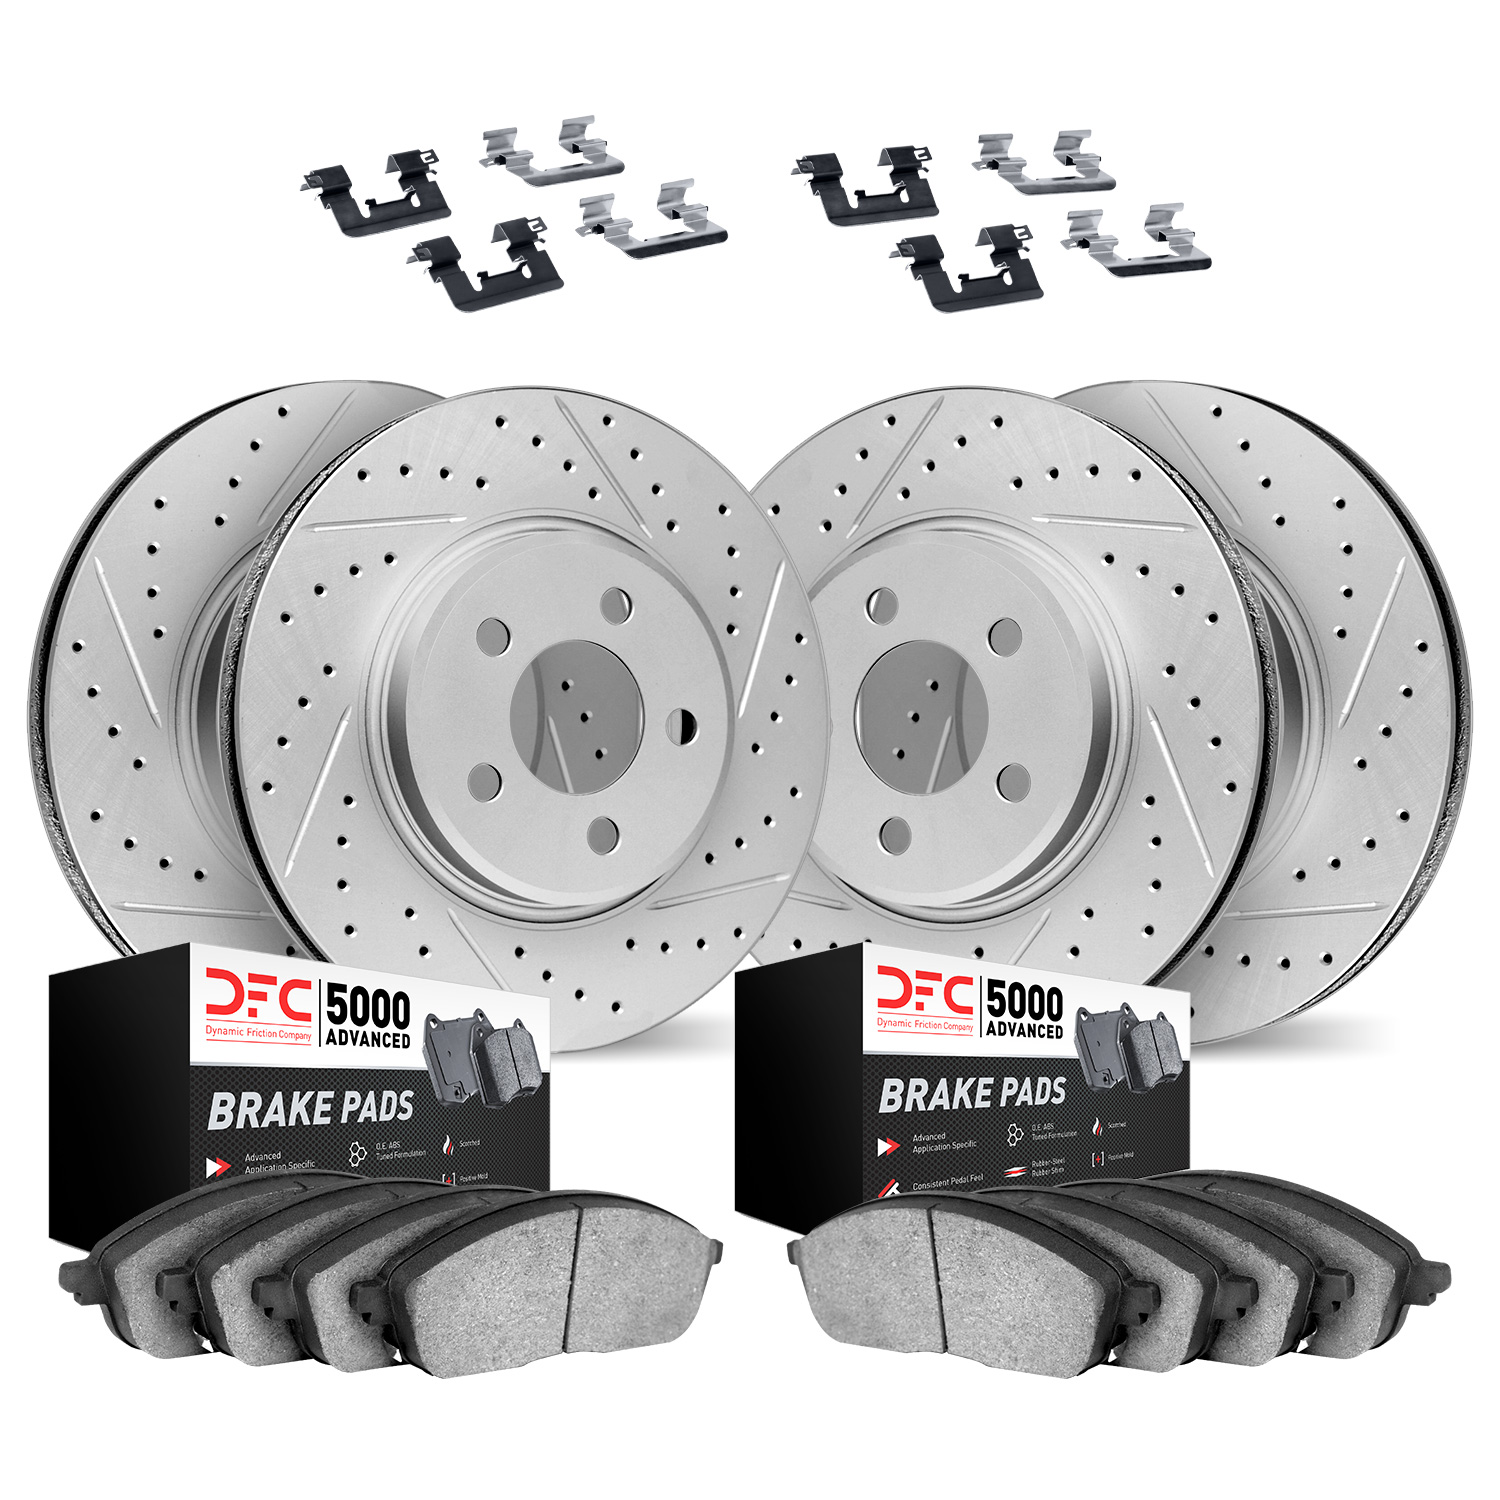 2514-31036 Geoperformance Drilled/Slotted Rotors w/5000 Advanced Brake Pads Kit & Hardware, 2017-2019 BMW, Position: Front and R